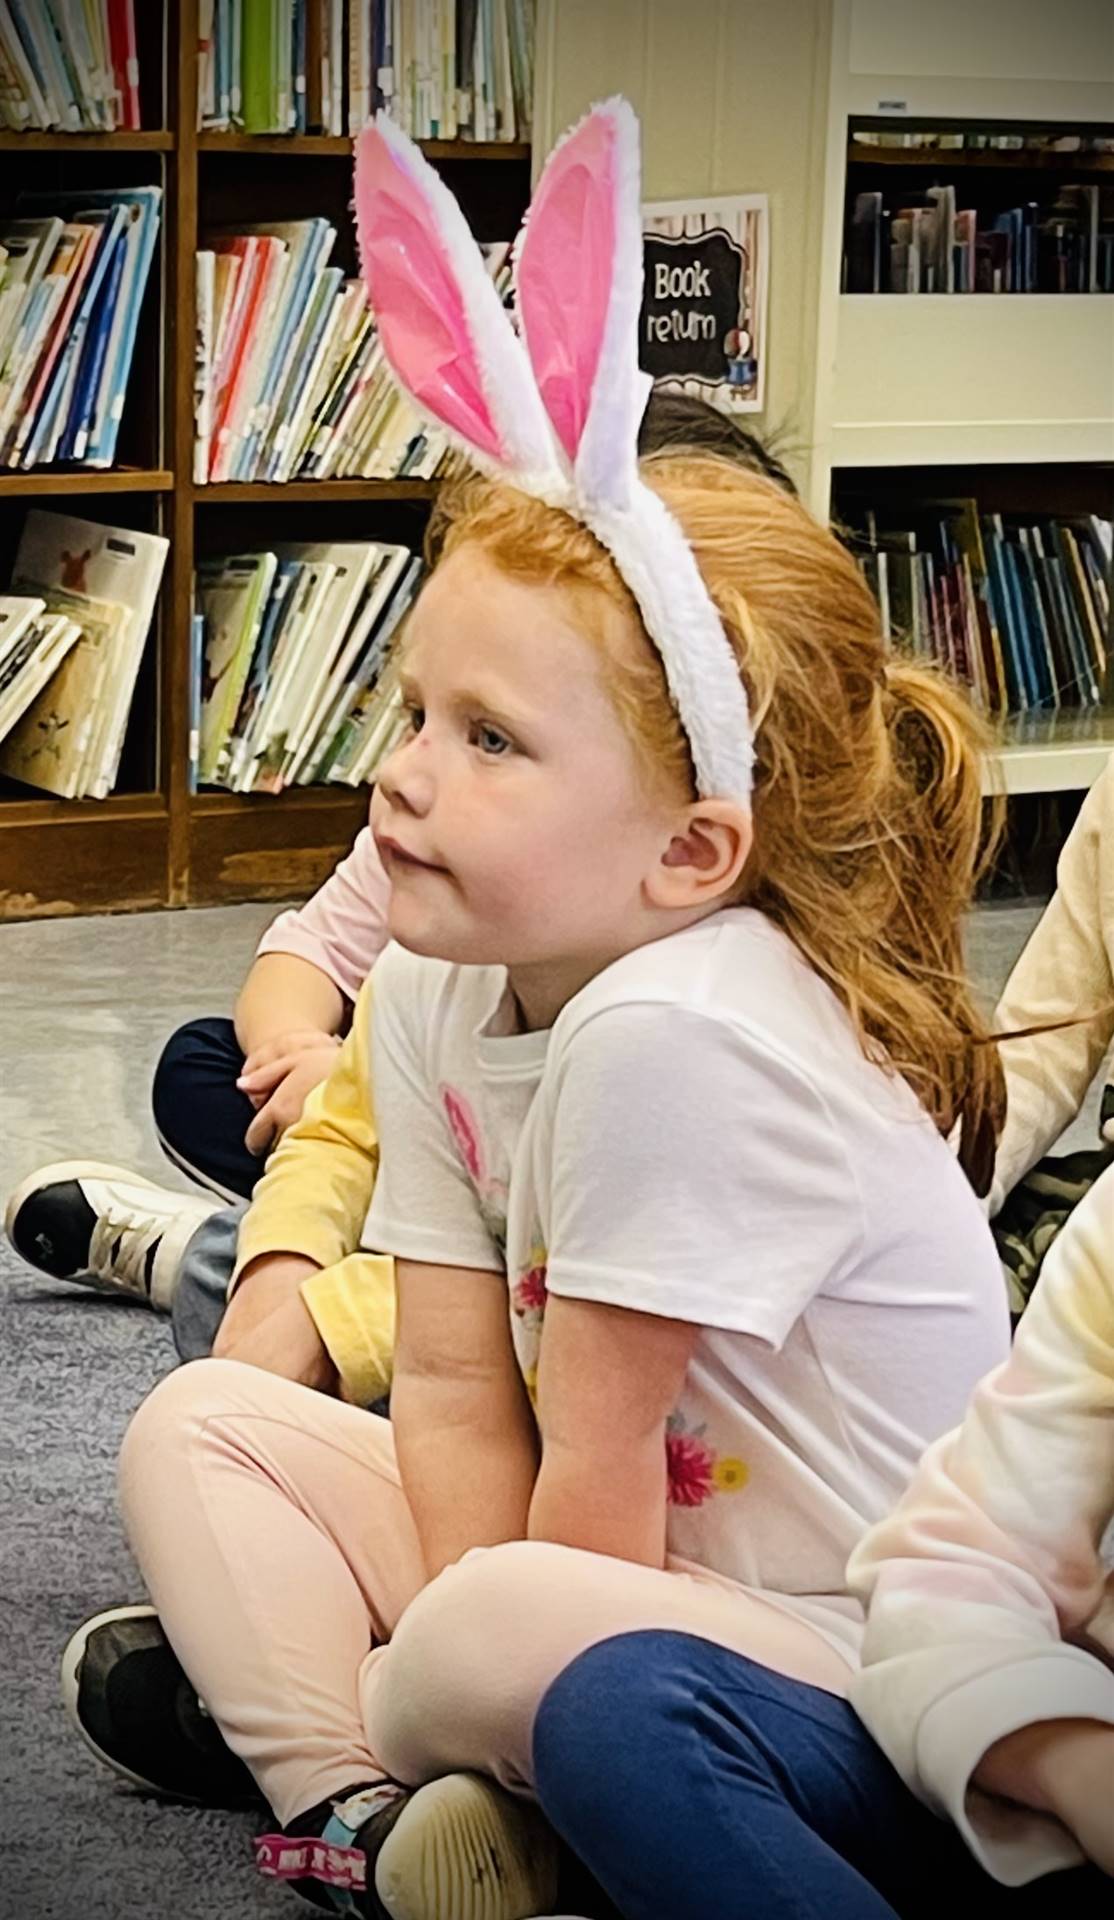 a student with pink bunny ears.